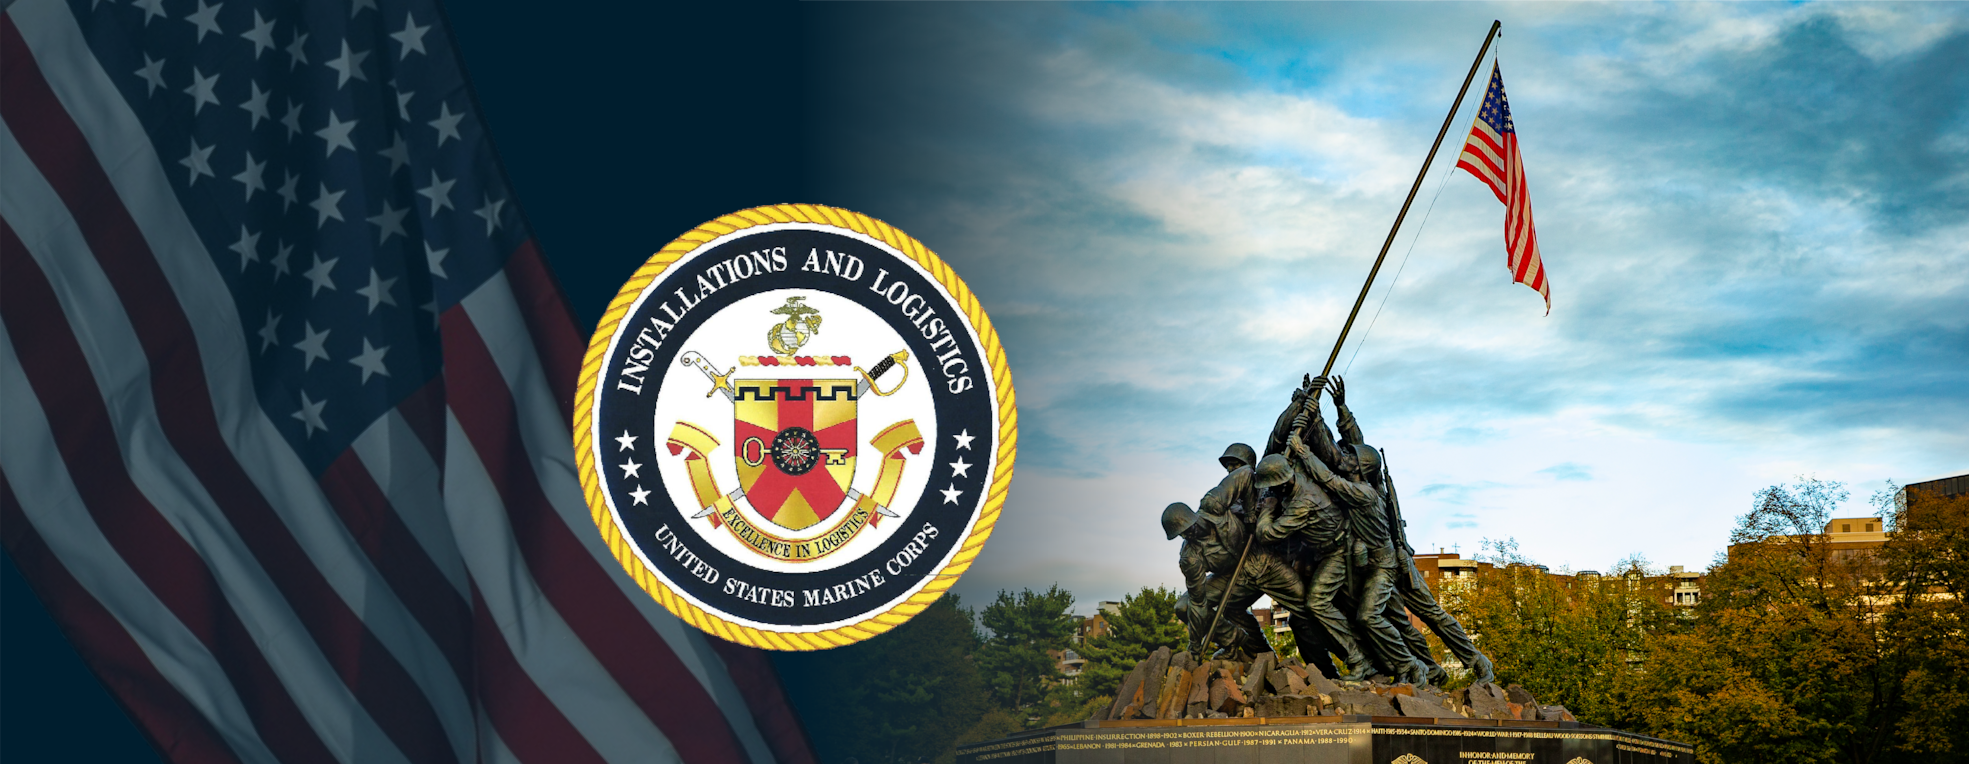 Graphic banner with (from left to right) the American flag, I&L coat of arms, and Quantico statue of Iwo Jima.